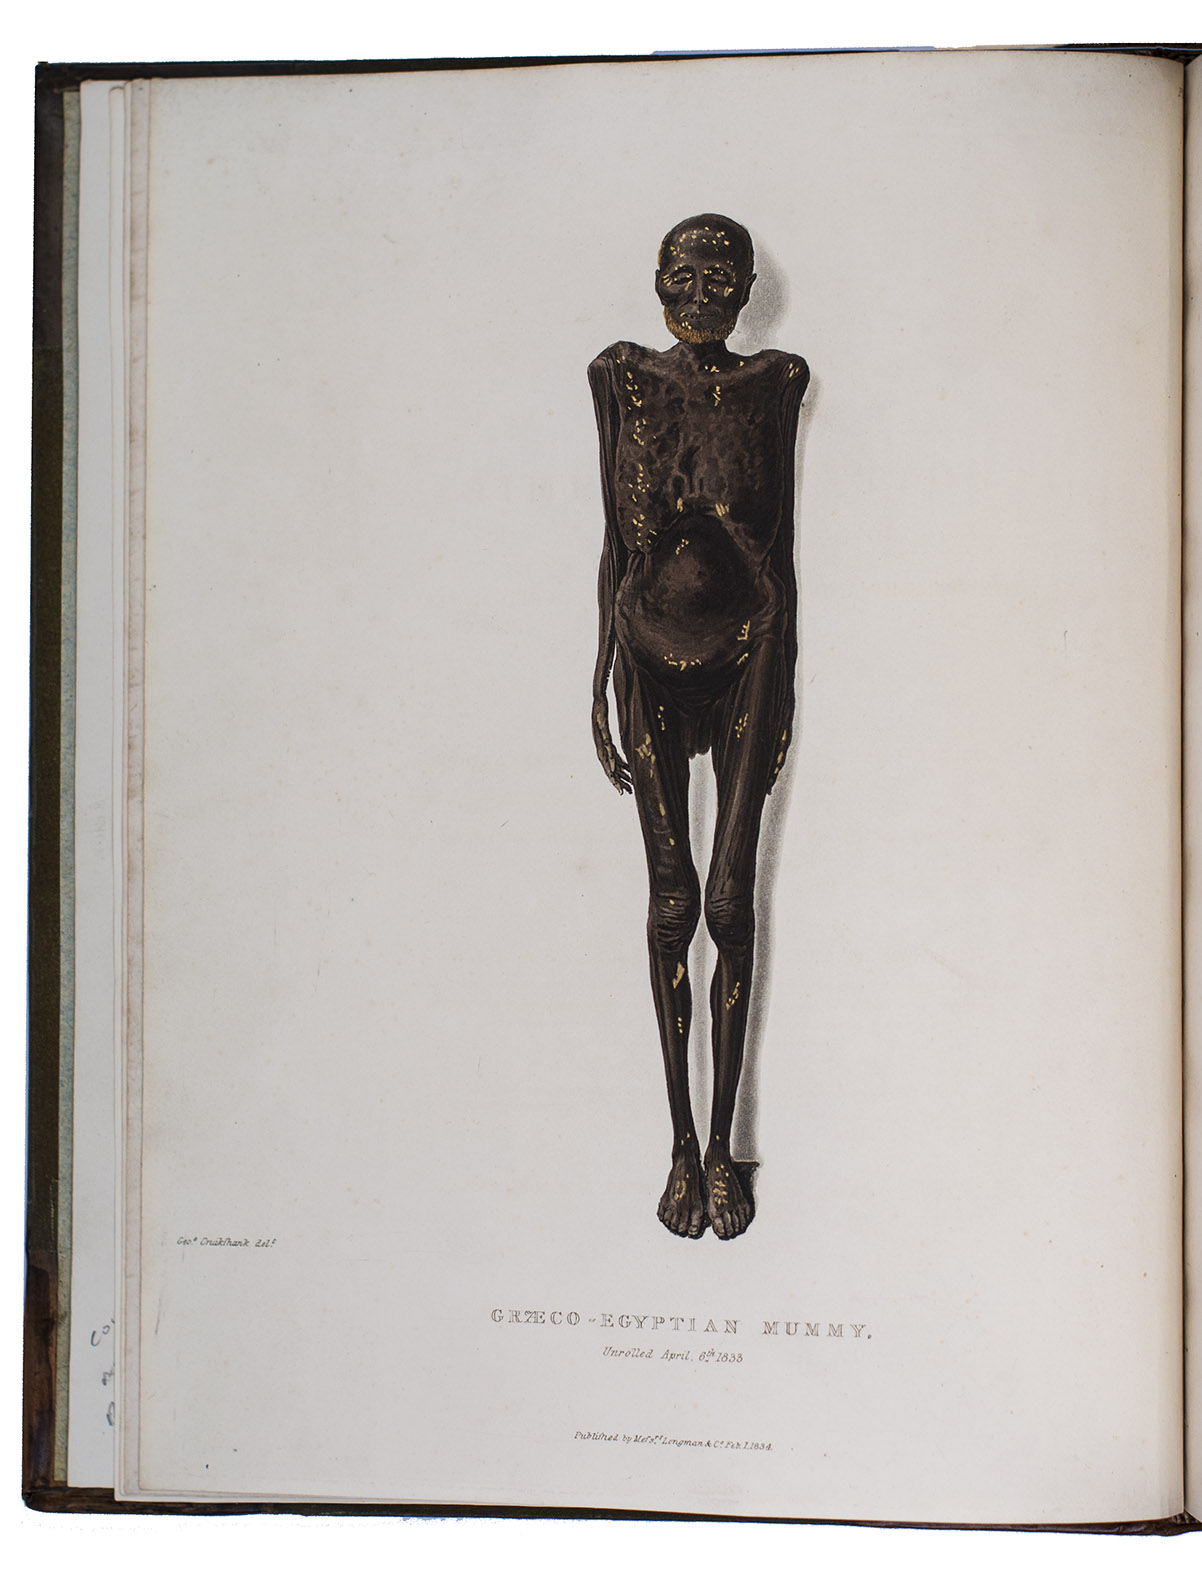 PETTIGREW, Thomas Joseph. - A history of Egyptian mummies, and an account of the worship and embalming of the sacred animals by the Egyptians; with remarks on the funeral ceremonies of different nations, and observations on the mummies of the Canary Islands, of the ancient Peruvians, Burman priests, &c.London, Longman, Rees, Orme, Brown, Green, and Longman (back of title-page and colophon: printed by P.P. Thoms), 1834. 4to. With 13 numbered lithographed plates (the first used as frontispiece), including 3 fully and 1 partly coloured by a contemporary hand, of which 2 highlighted in gold. Contemporary half calf, restored and rebacked with parts of the original backstrip laid down, with new tooling and title-label on spine, cloth sides, later endpapers.